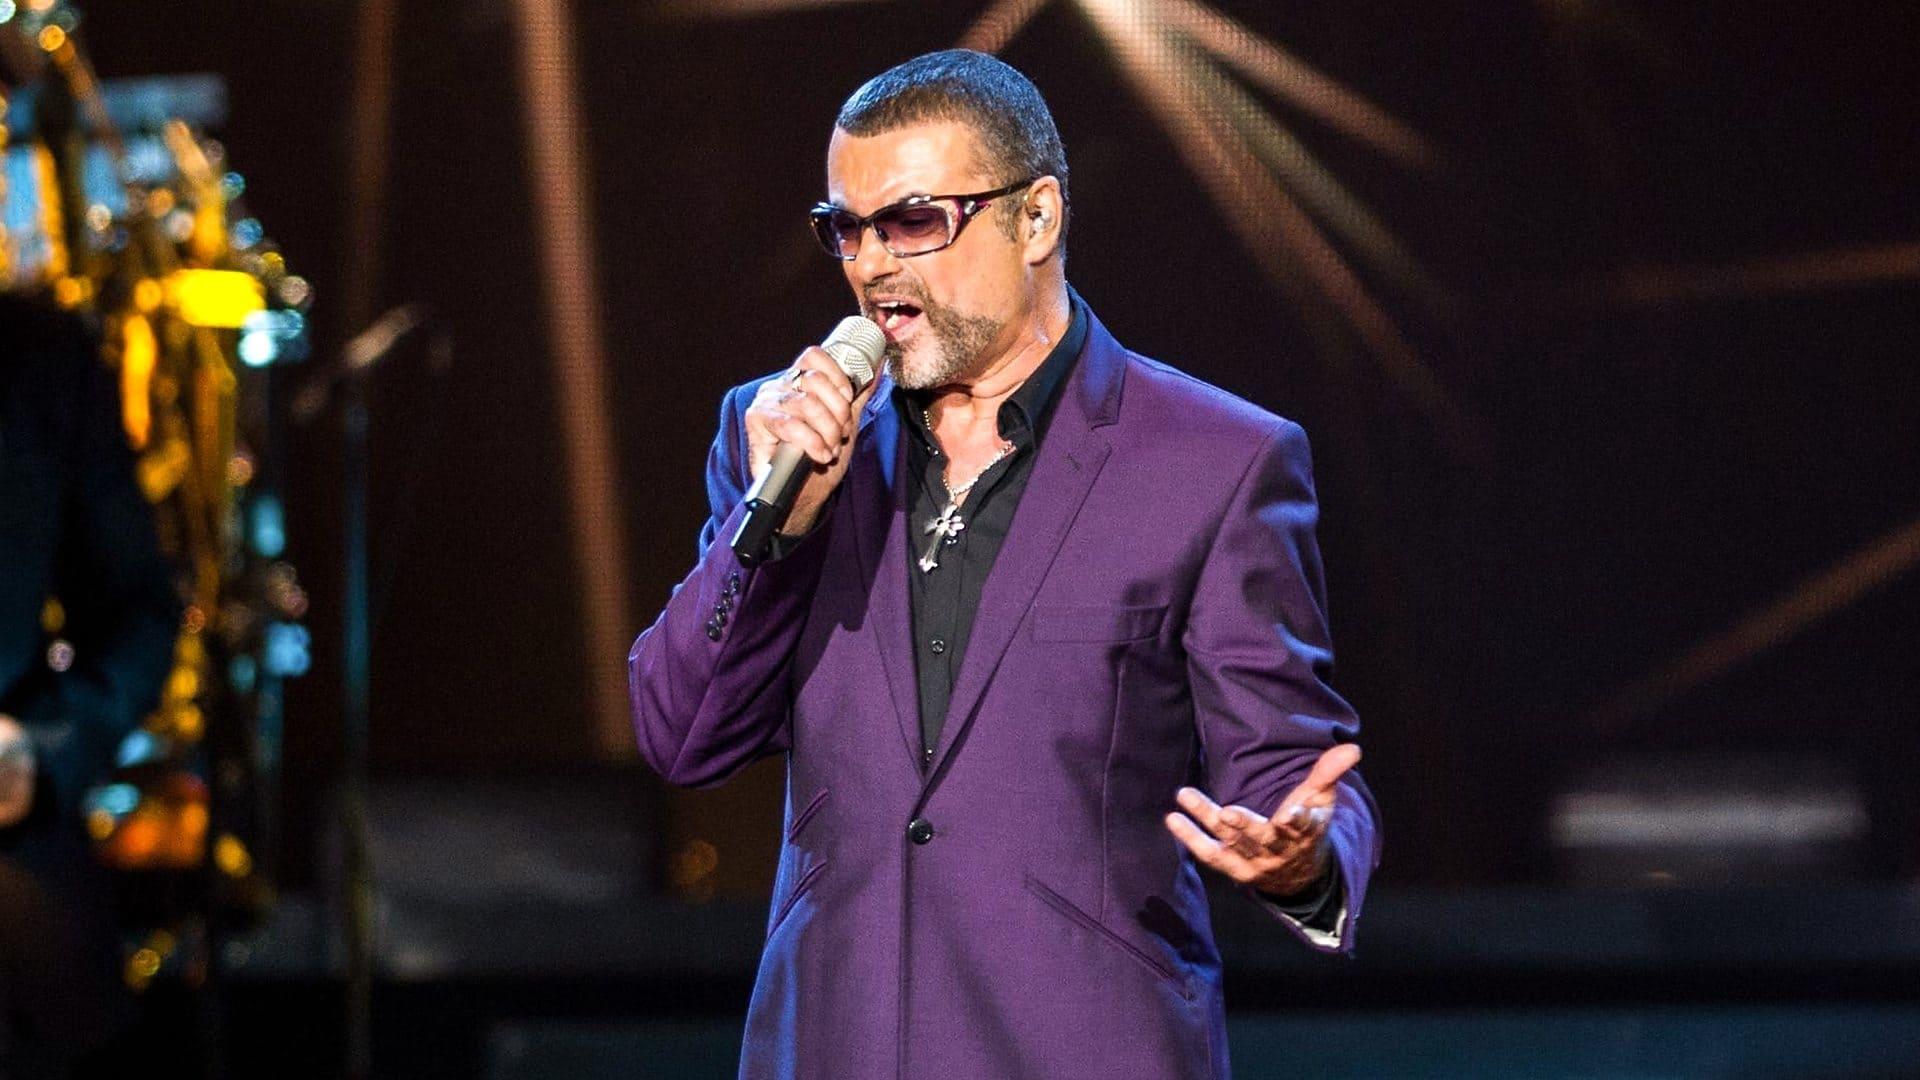 George Michael at the BBC backdrop